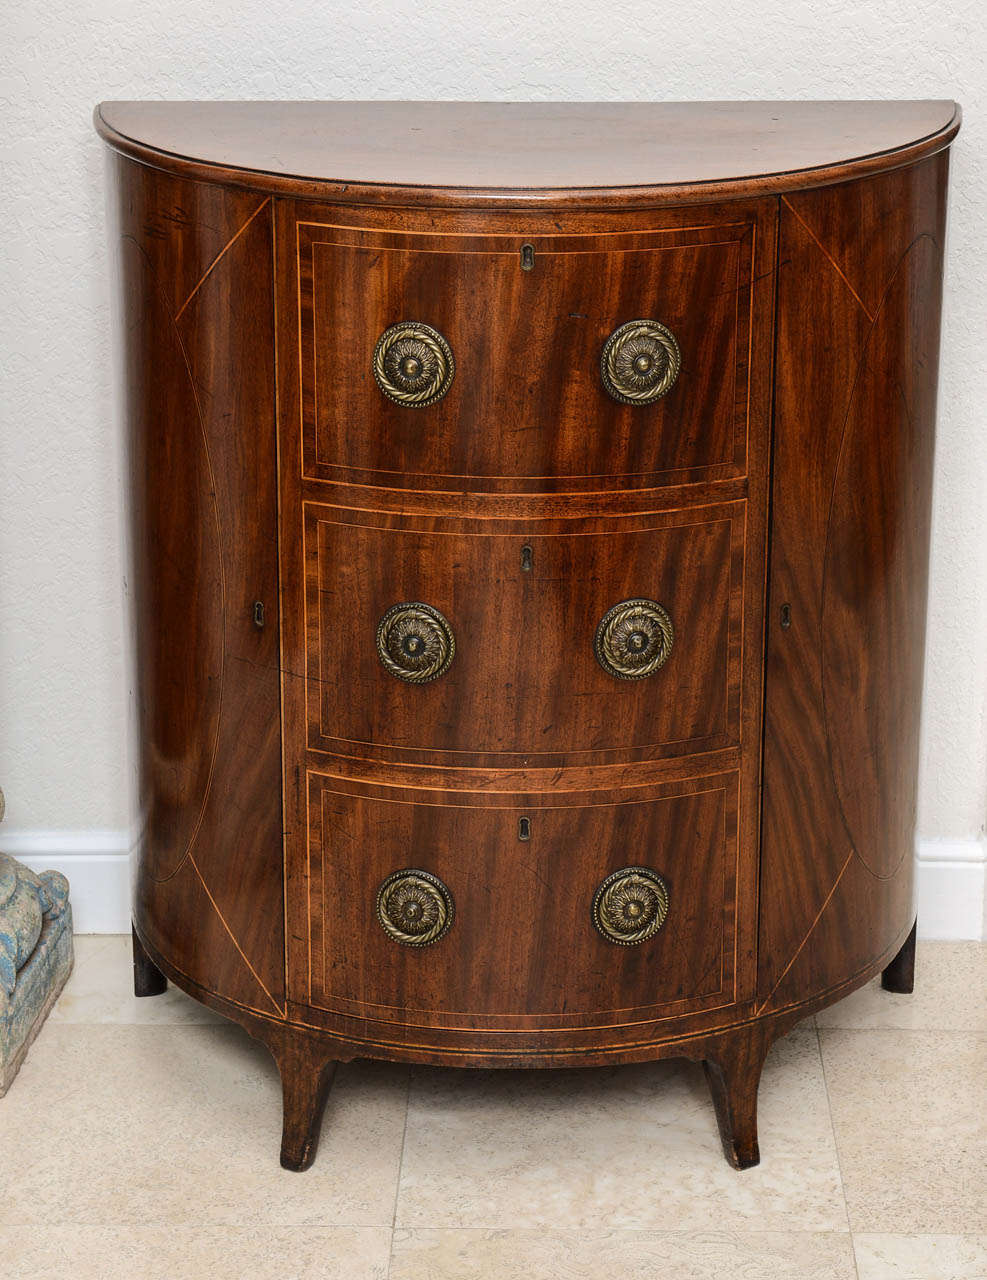 Very fine commode with one door & faux three drawers made in mahogany & cross banded.  Museum quality at an affordable price.  Original restored finish

Originally $ 20,000.00

George III (George William Frederick; 4 June 1738[1] – 29 January